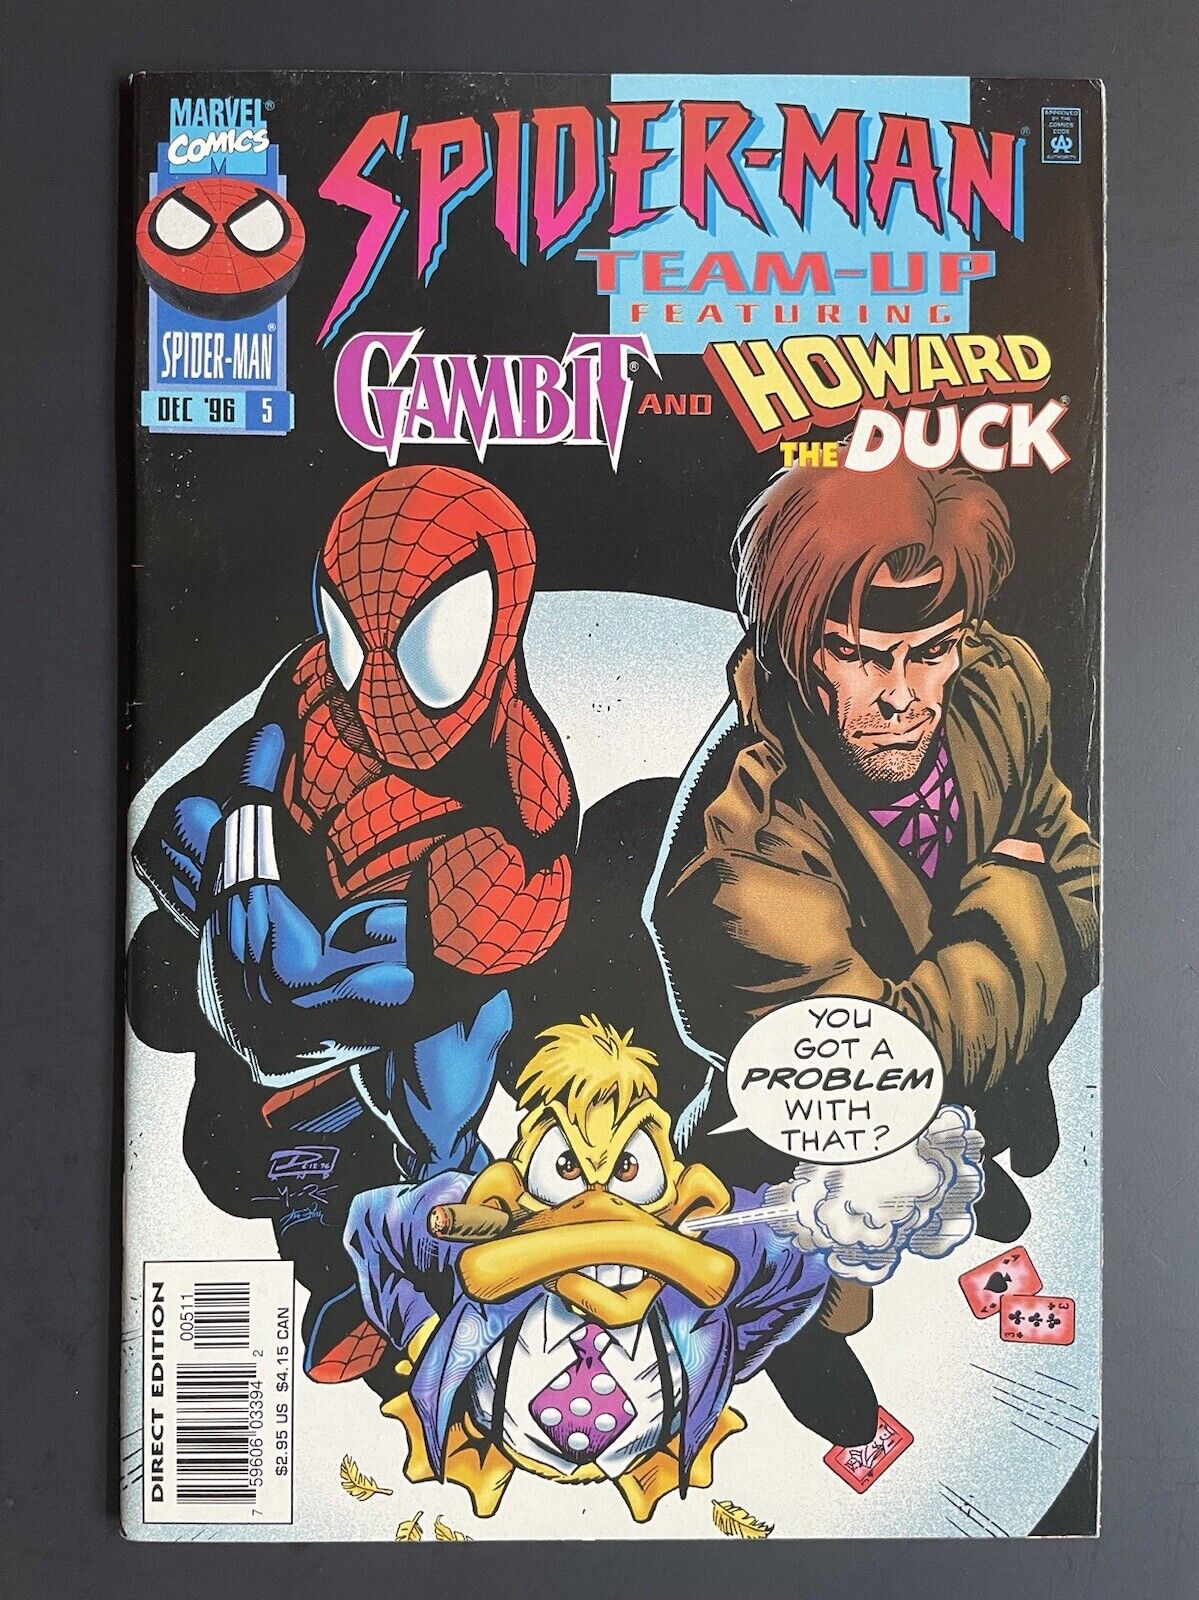 Spider-man Team-Up 5 Featuring Gambit & Howard the Duck Marvel Comics VF/NM